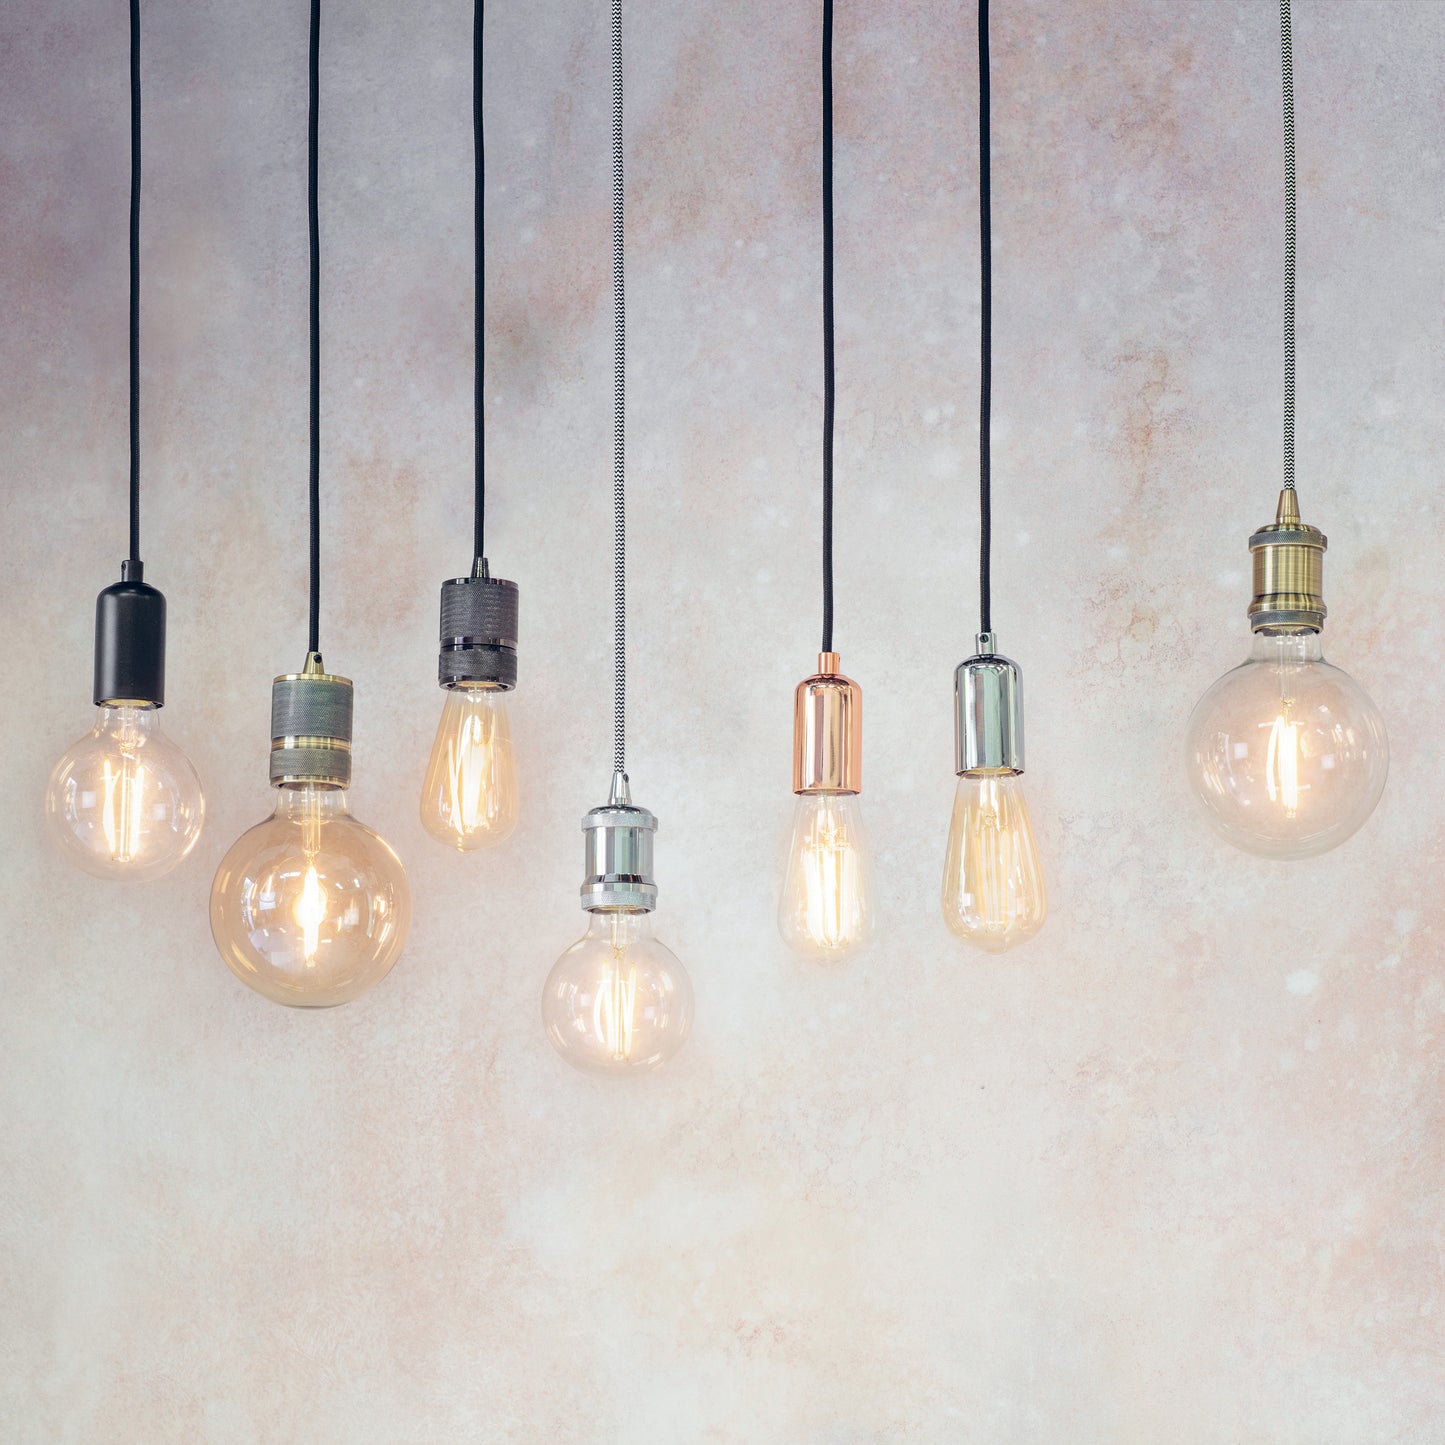 A group of light bulbs hanging on a wall.